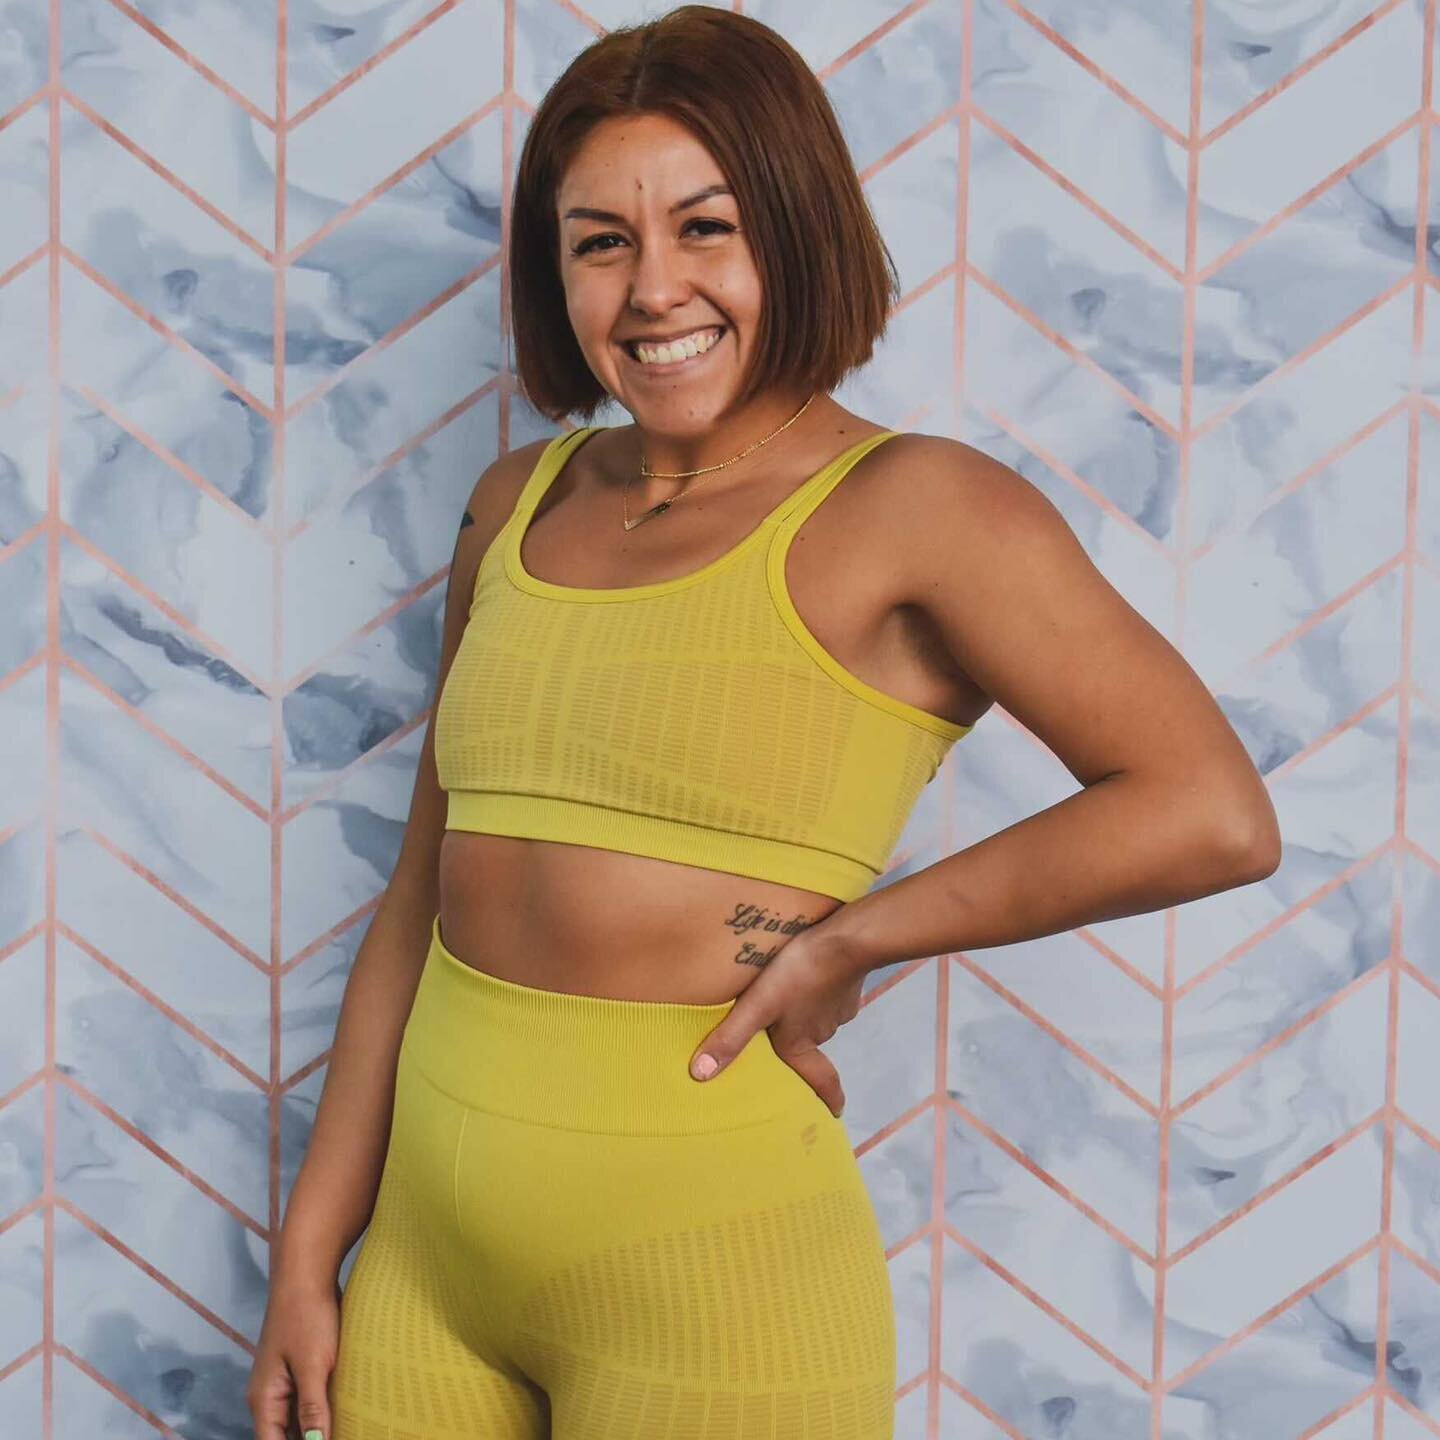 Meet Kaila&mdash;our manager and head trainer. Kaila began her fitness journey working to get in shape for her wedding. As she developed this newfound passion, her simple fitness journey turned into a wellness journey; eventually setting her on a pat